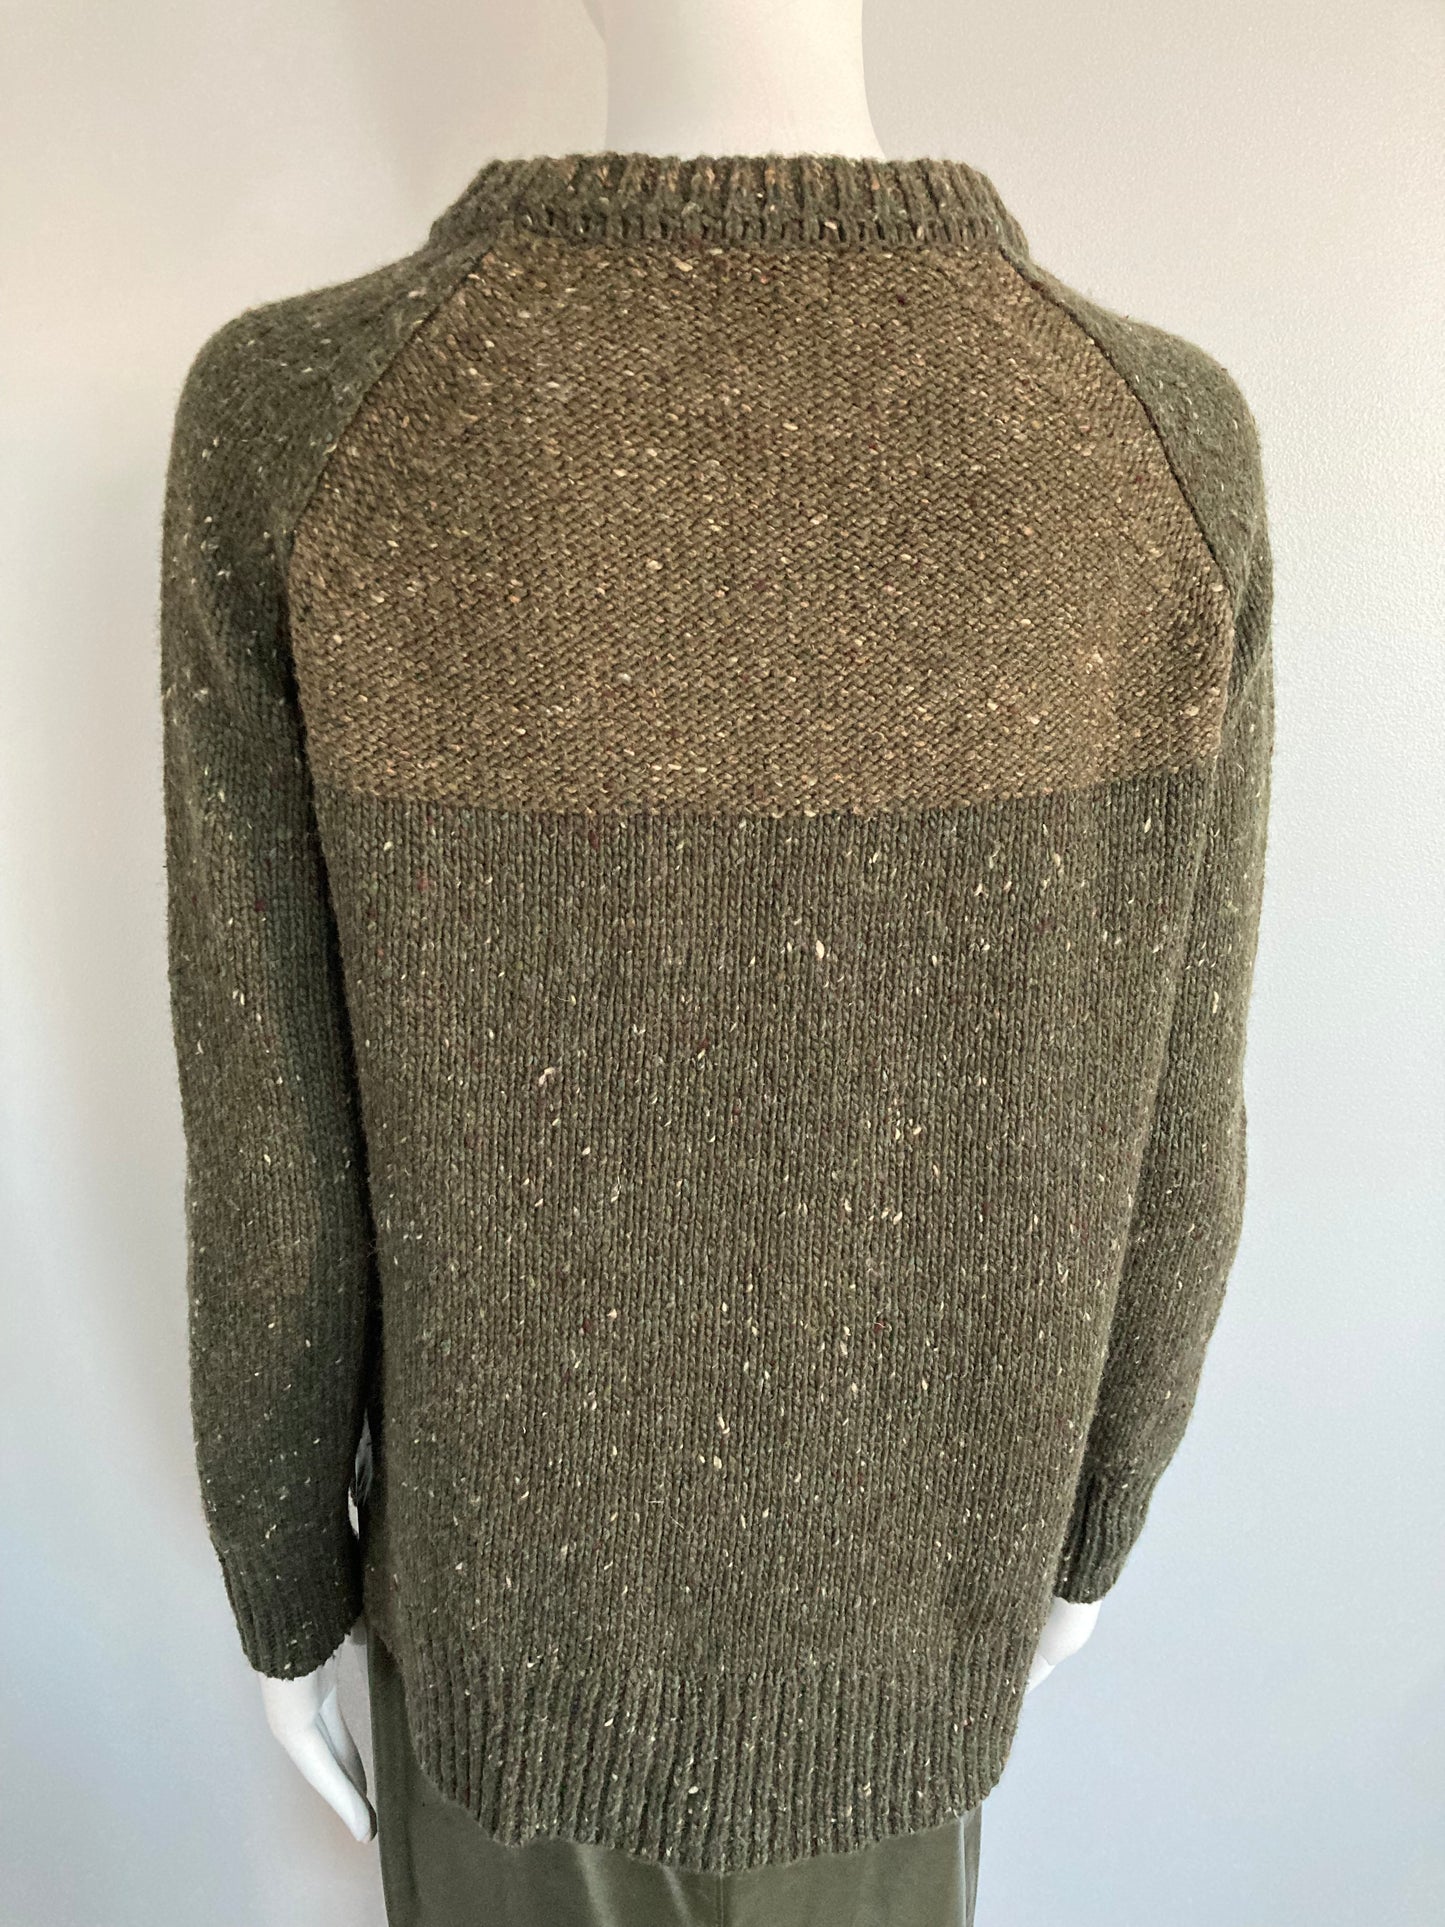 Modern Roots Sweater, Size M